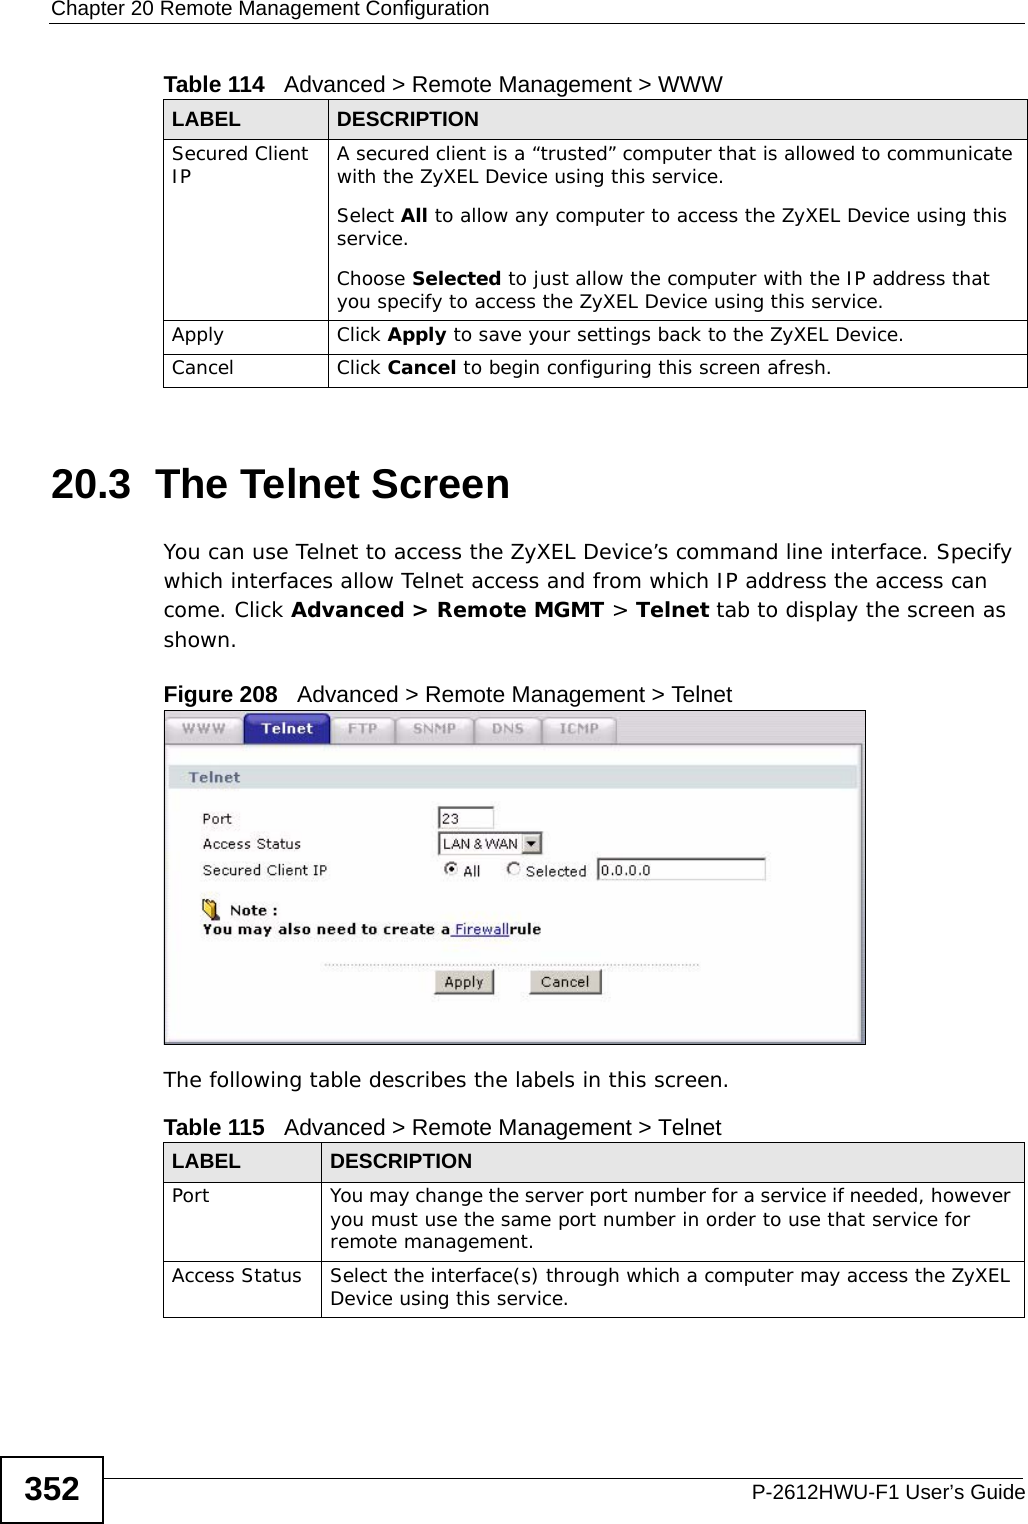 Chapter 20 Remote Management ConfigurationP-2612HWU-F1 User’s Guide35220.3  The Telnet ScreenYou can use Telnet to access the ZyXEL Device’s command line interface. Specify which interfaces allow Telnet access and from which IP address the access can come. Click Advanced &gt; Remote MGMT &gt; Telnet tab to display the screen as shown. Figure 208   Advanced &gt; Remote Management &gt; TelnetThe following table describes the labels in this screen.Secured Client IP A secured client is a “trusted” computer that is allowed to communicate with the ZyXEL Device using this service. Select All to allow any computer to access the ZyXEL Device using this service.Choose Selected to just allow the computer with the IP address that you specify to access the ZyXEL Device using this service.Apply Click Apply to save your settings back to the ZyXEL Device. Cancel Click Cancel to begin configuring this screen afresh.Table 114   Advanced &gt; Remote Management &gt; WWWLABEL DESCRIPTIONTable 115   Advanced &gt; Remote Management &gt; TelnetLABEL DESCRIPTIONPort You may change the server port number for a service if needed, however you must use the same port number in order to use that service for remote management.Access Status Select the interface(s) through which a computer may access the ZyXEL Device using this service.